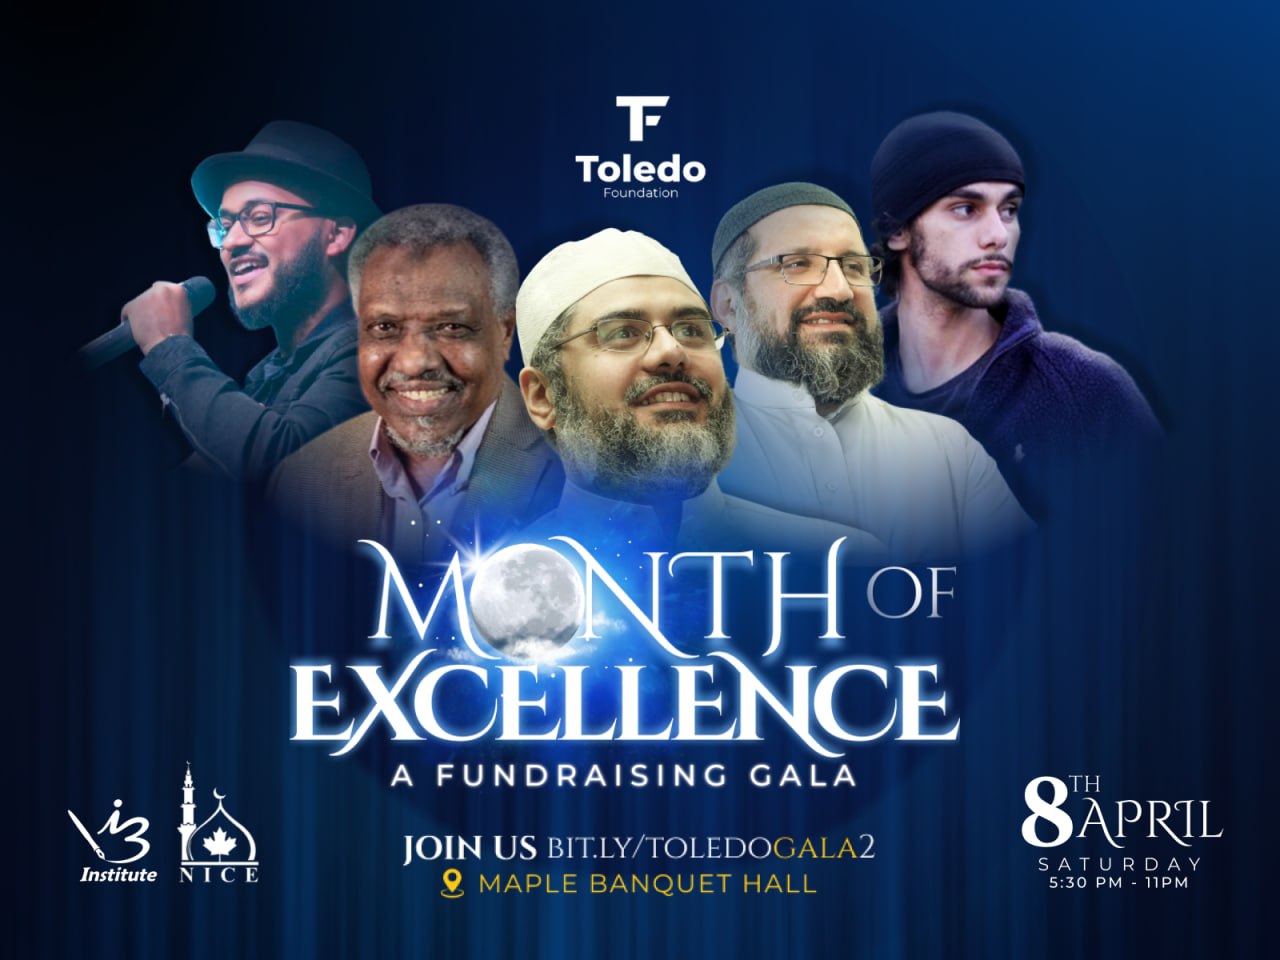 2nd Annual Toledo Fundraising Gala: A Month of Excellence